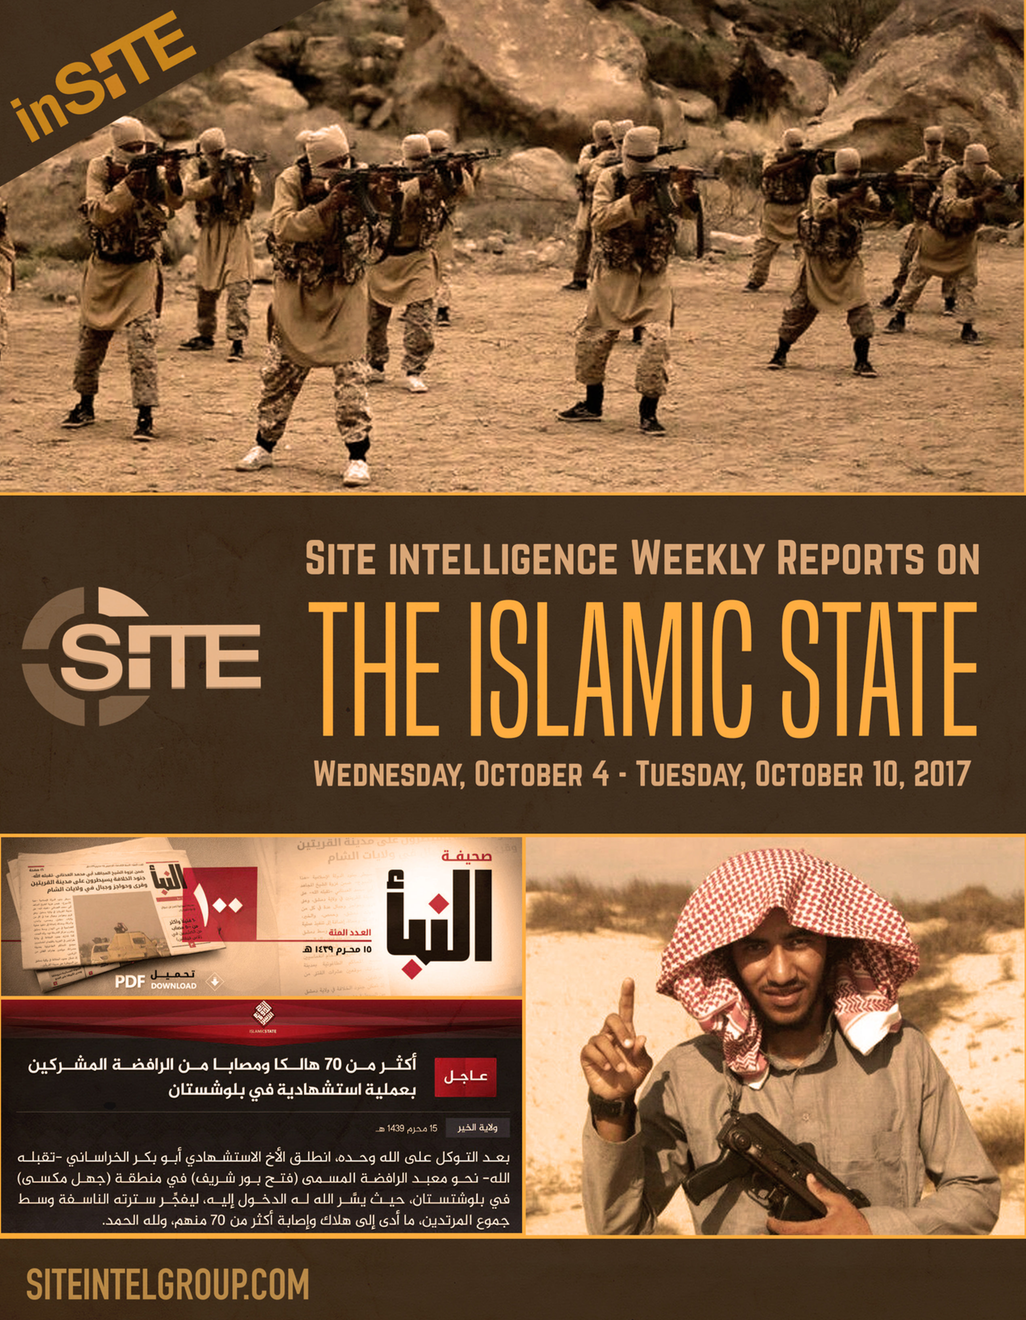 Weekly inSITE on the Islamic State, October 4 -10